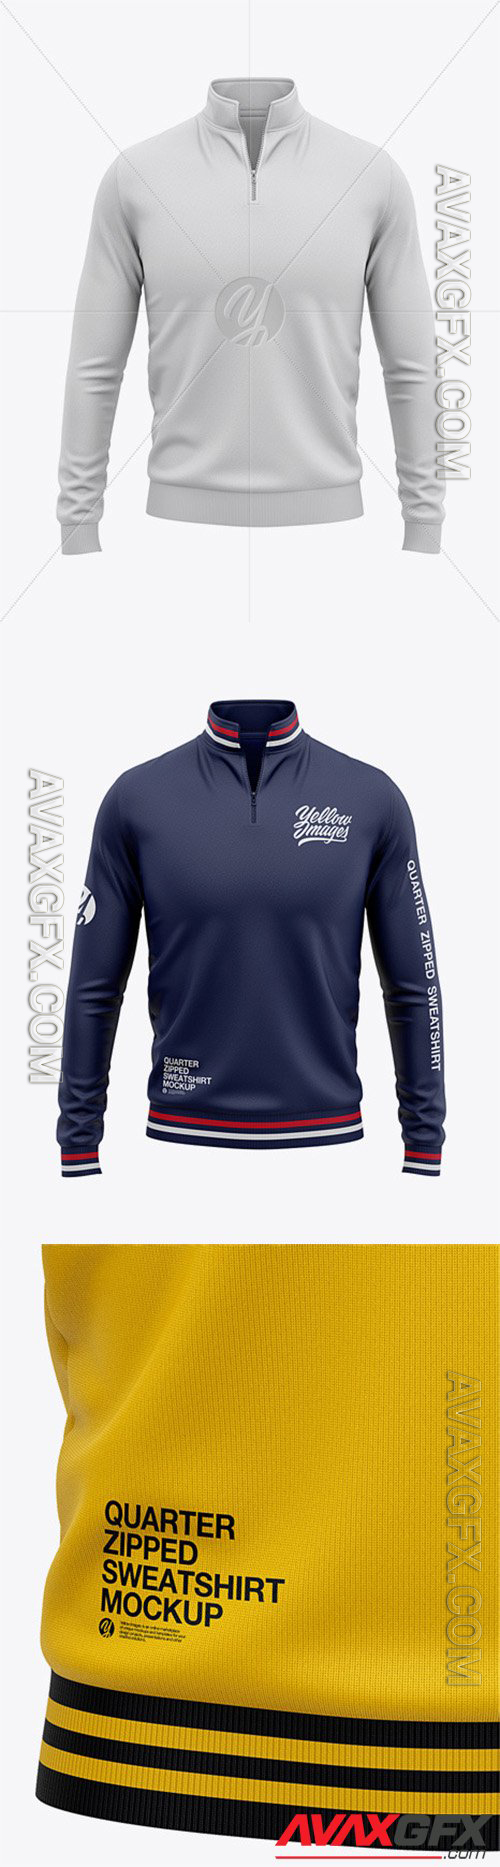 Download Men S Quarter Zip Sweatshirt Mockup Front View Of Zipped Pullover 53139 Avaxgfx All Downloads That You Need In One Place Graphic From Nitroflare Rapidgator